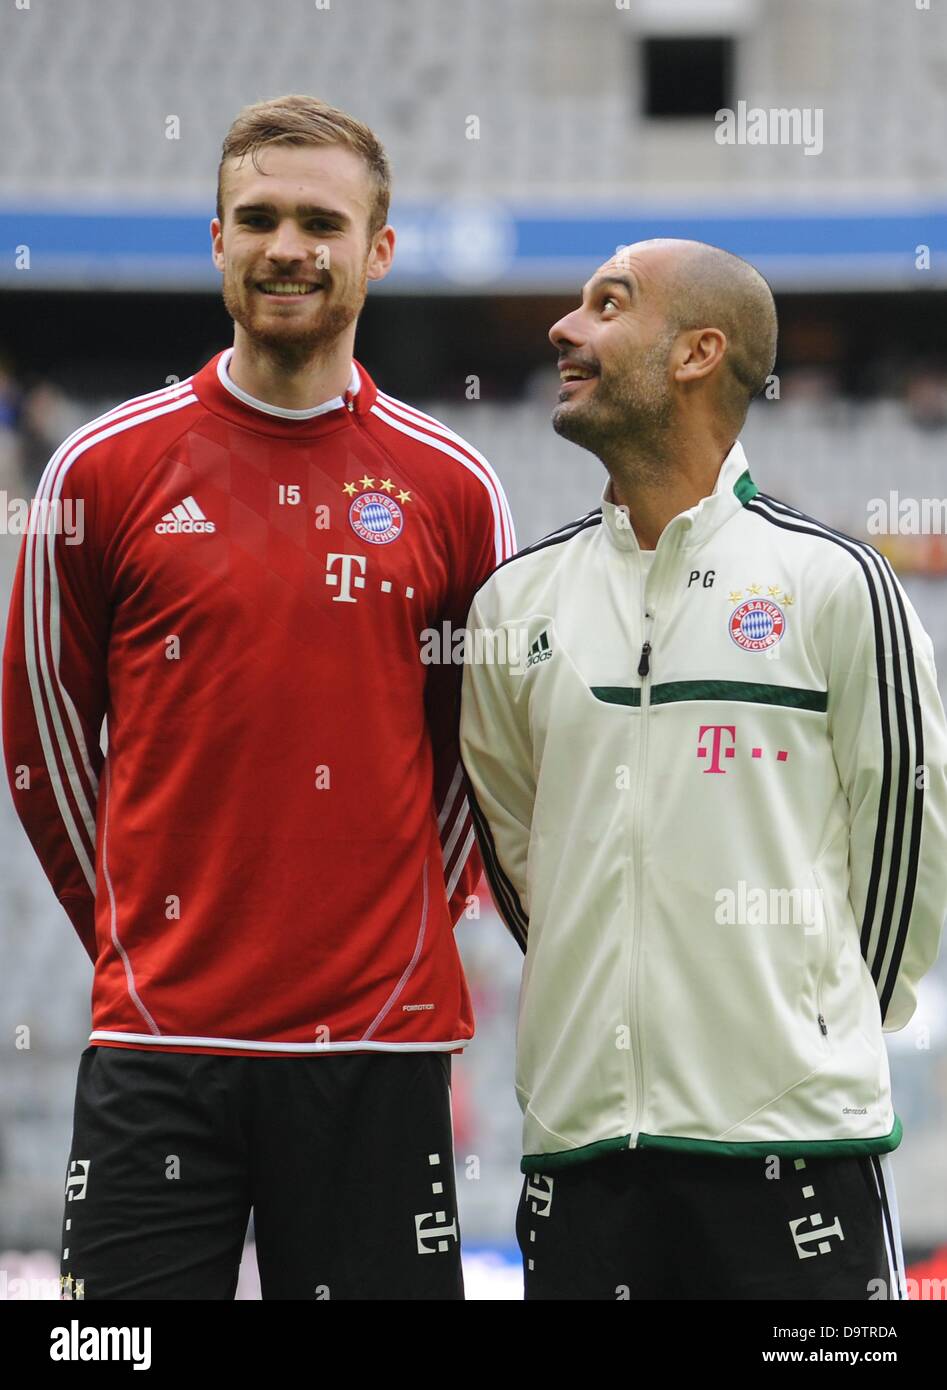 Pep guardiola r hi-res stock photography and images - Alamy